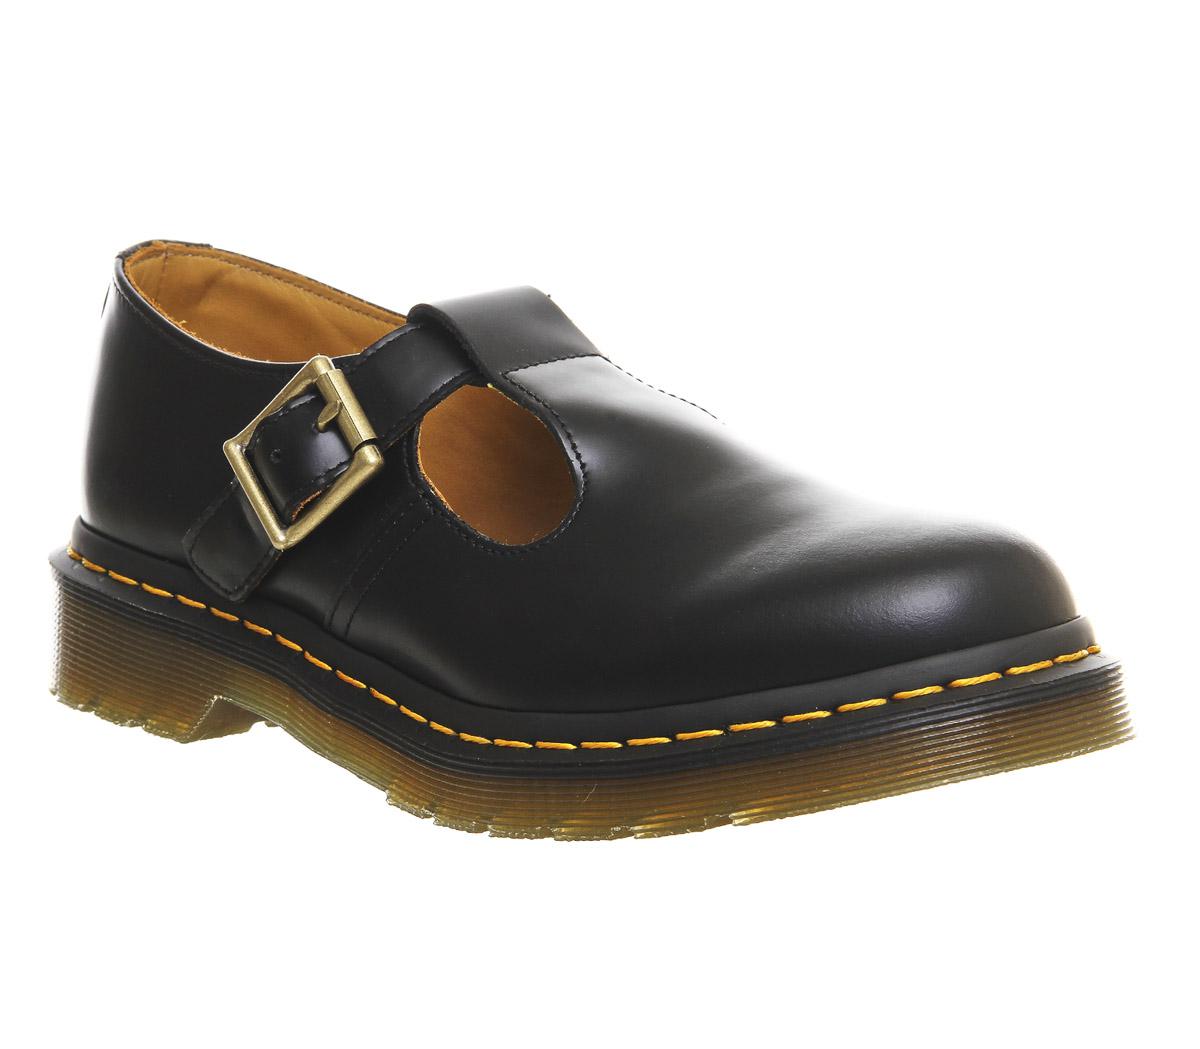 Lyst - Dr. Martens Polley T-bar Shoes in Black